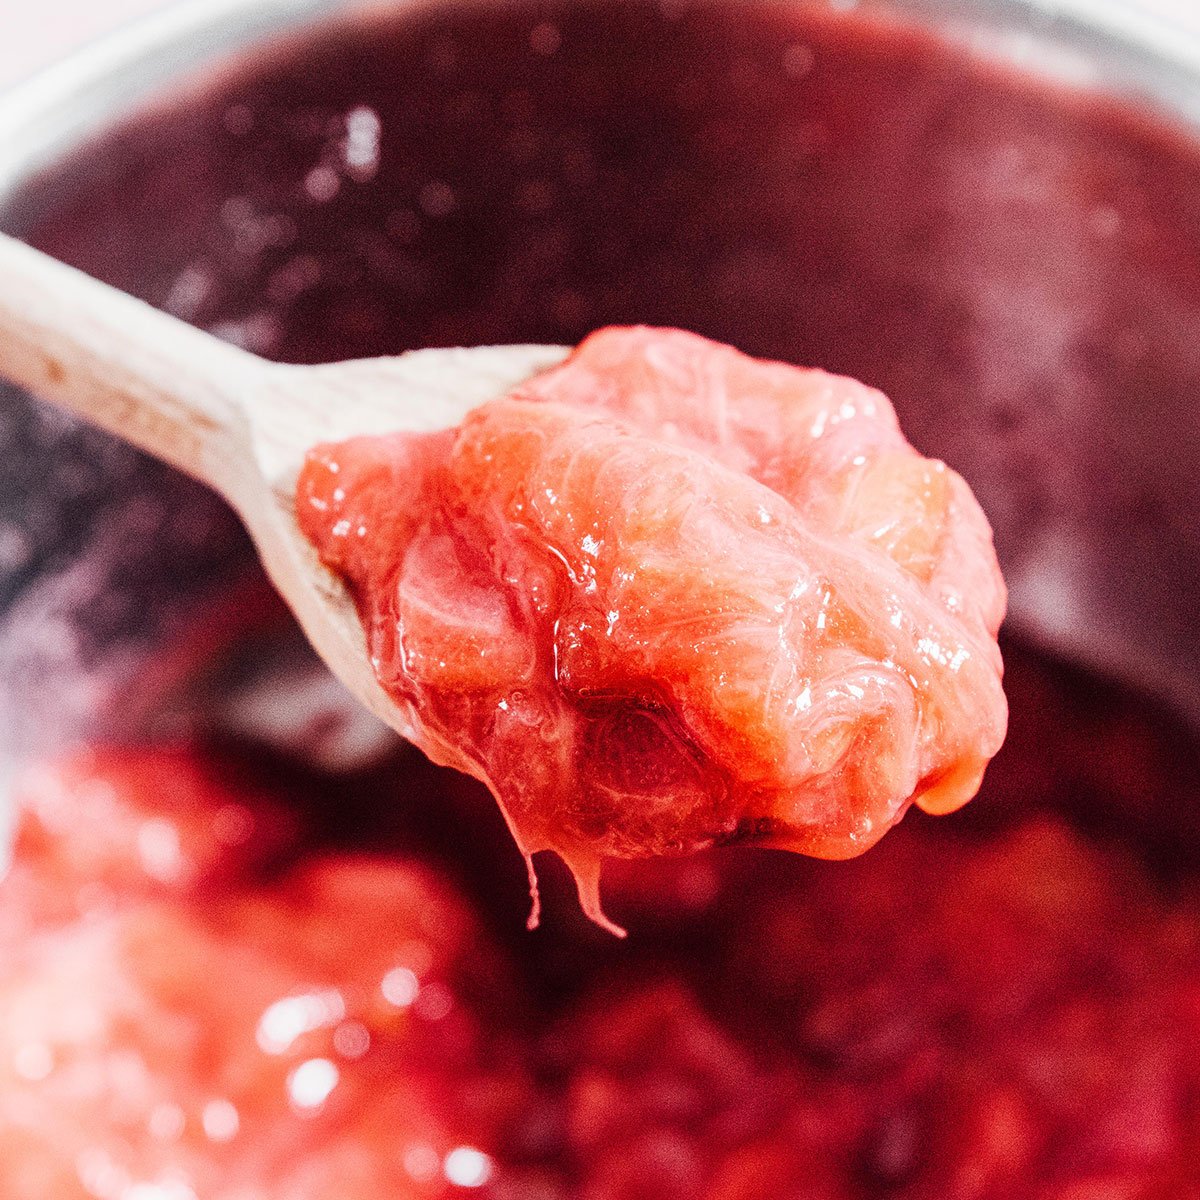 Rhubarb compote on a wooden spoon.